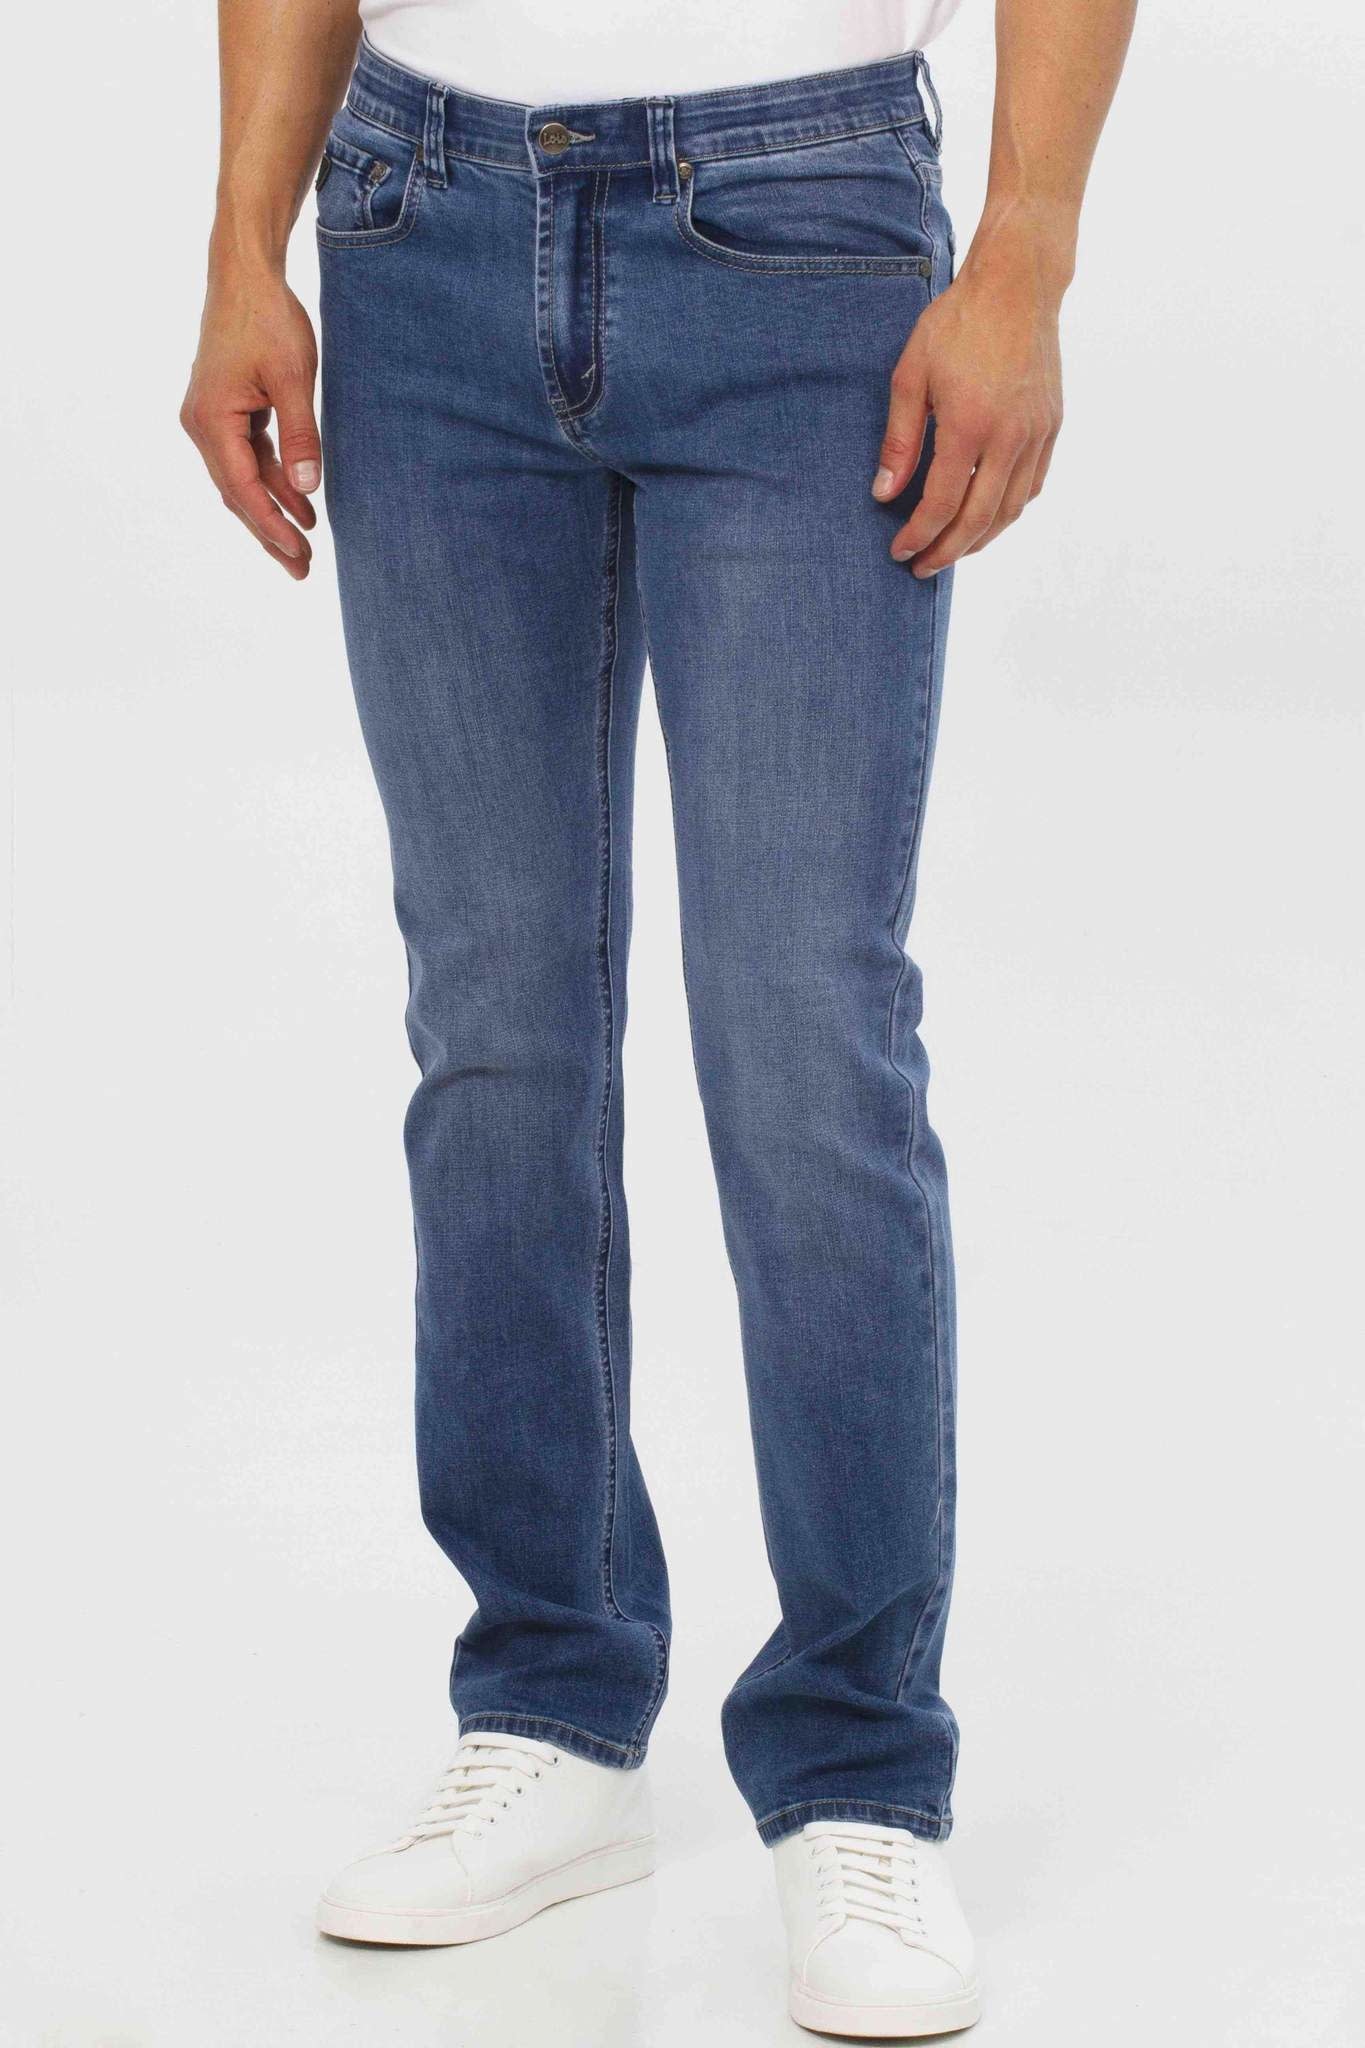 Lois Jeans - Brad Slim (1136-6866-20) - Ford and McIntyre Men's Wear